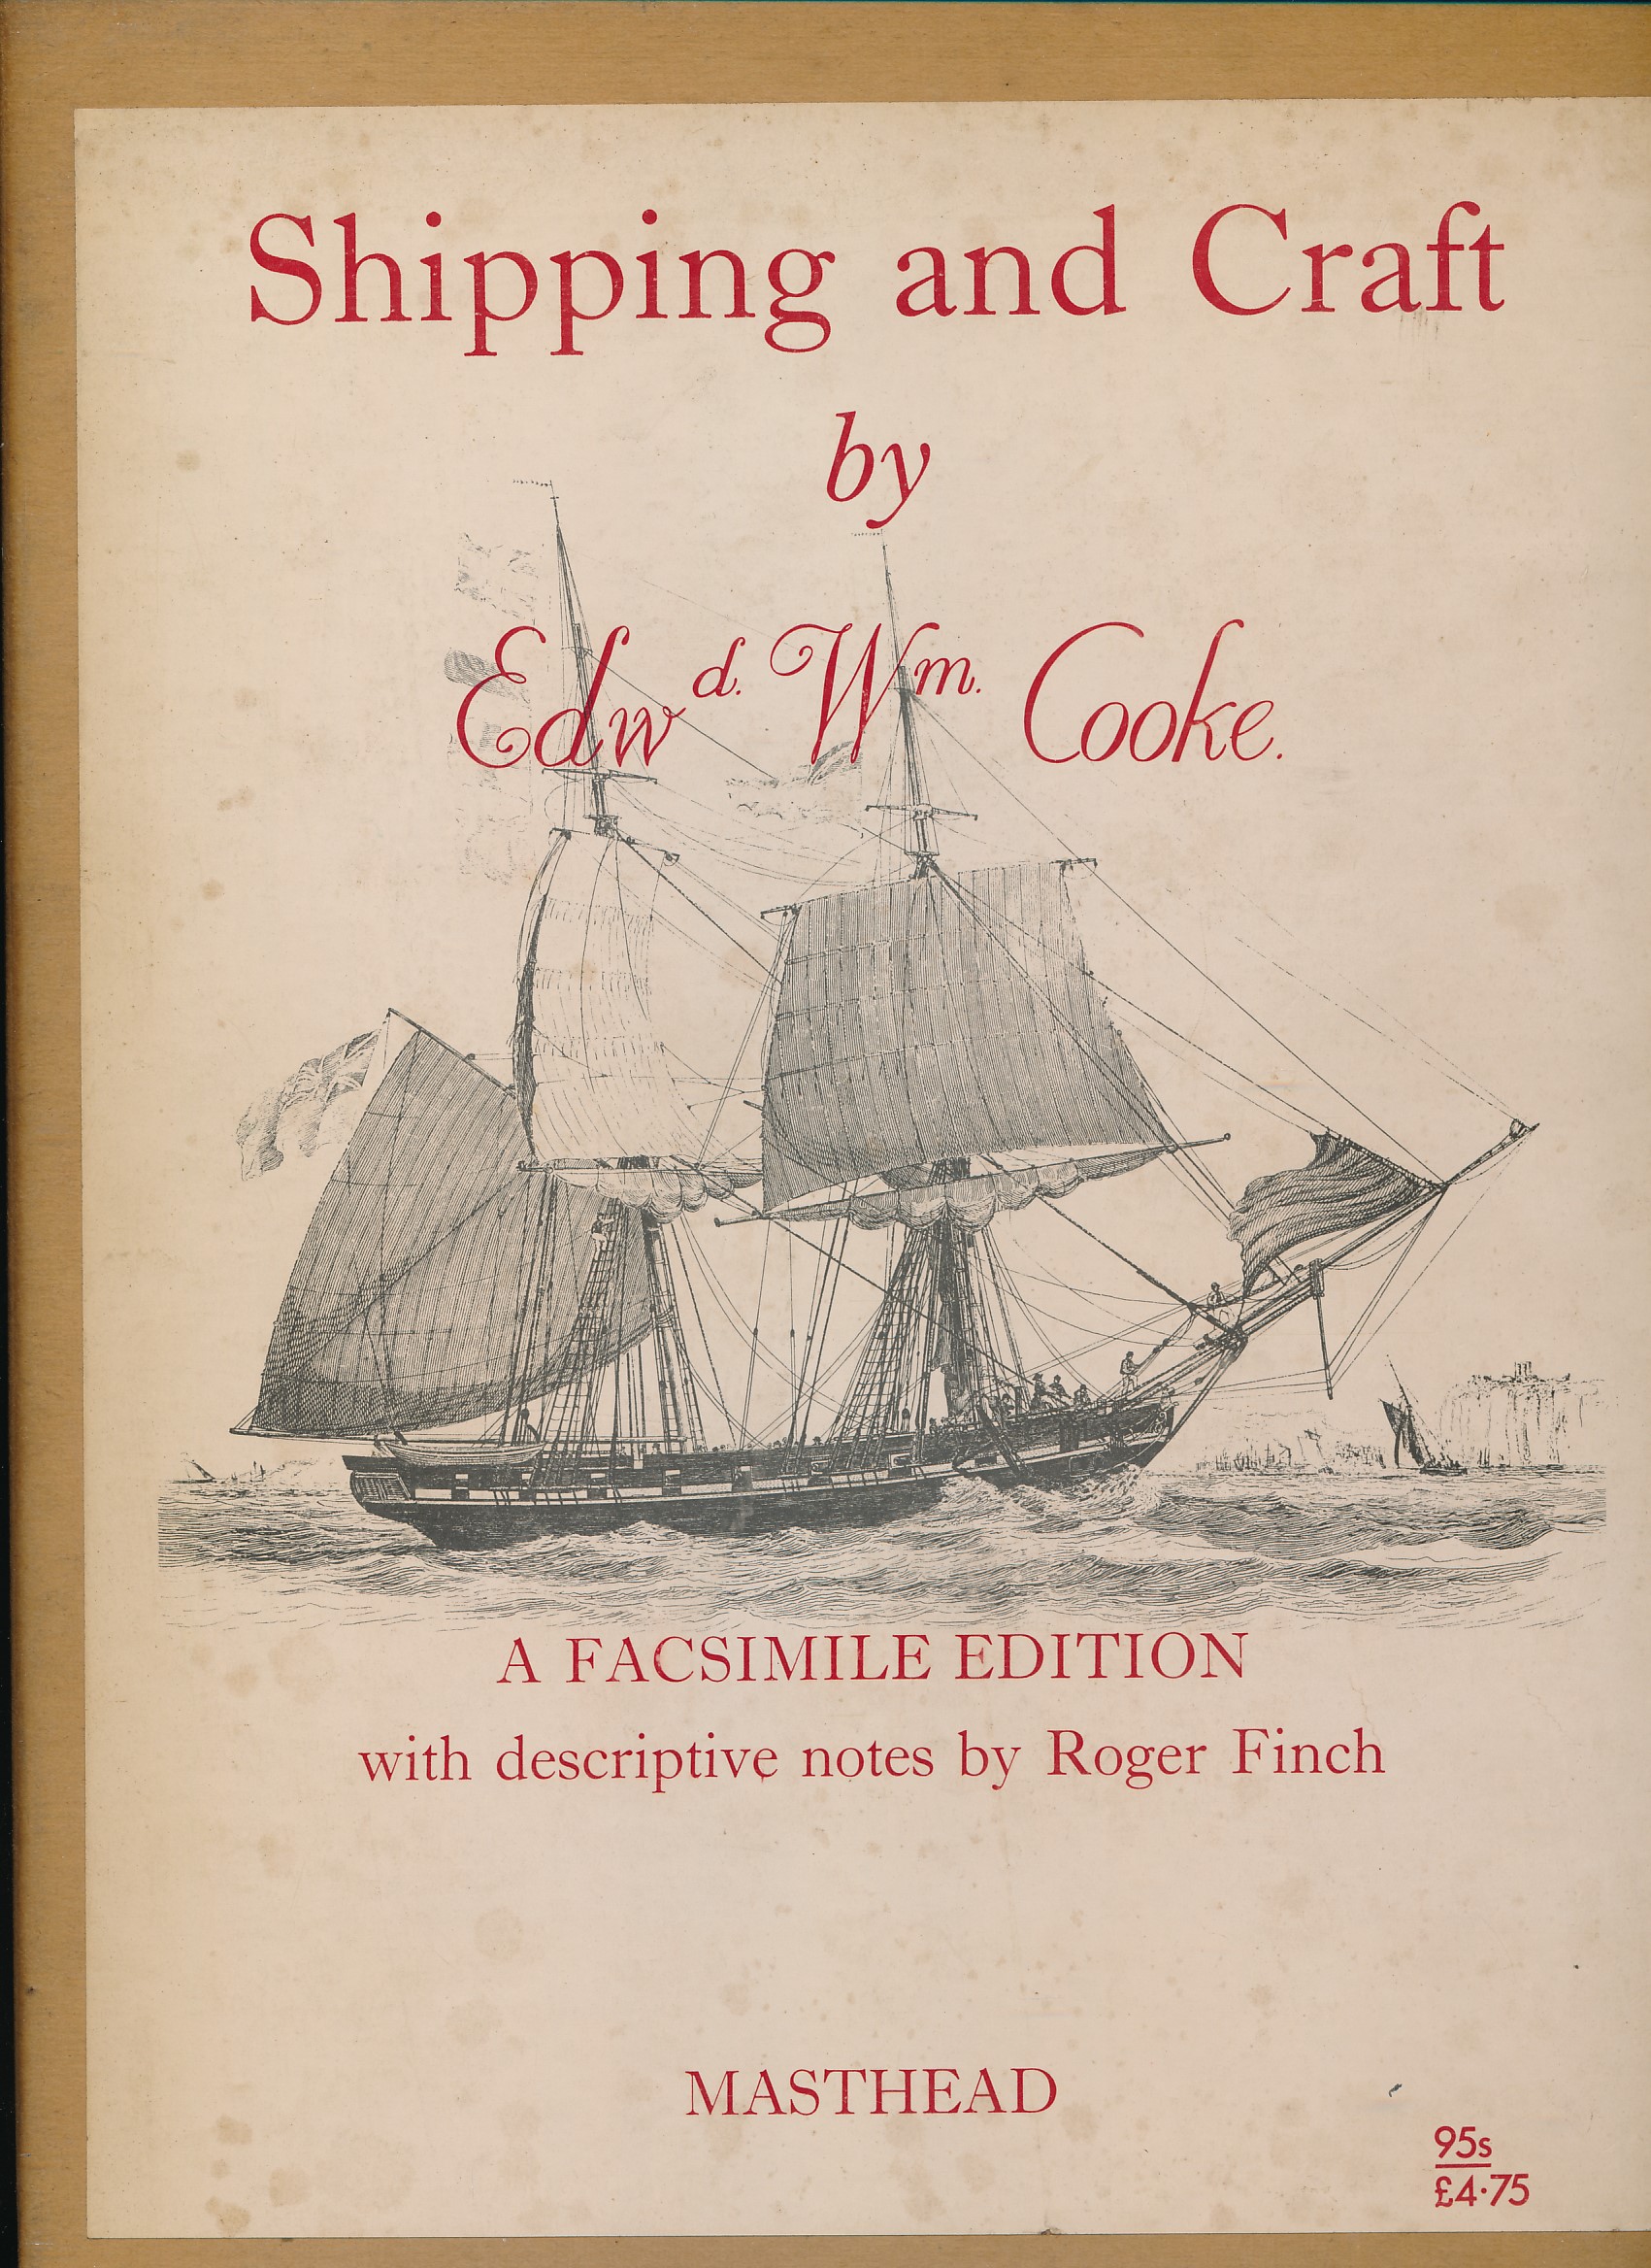 Shipping and Craft. Facsimile edition.